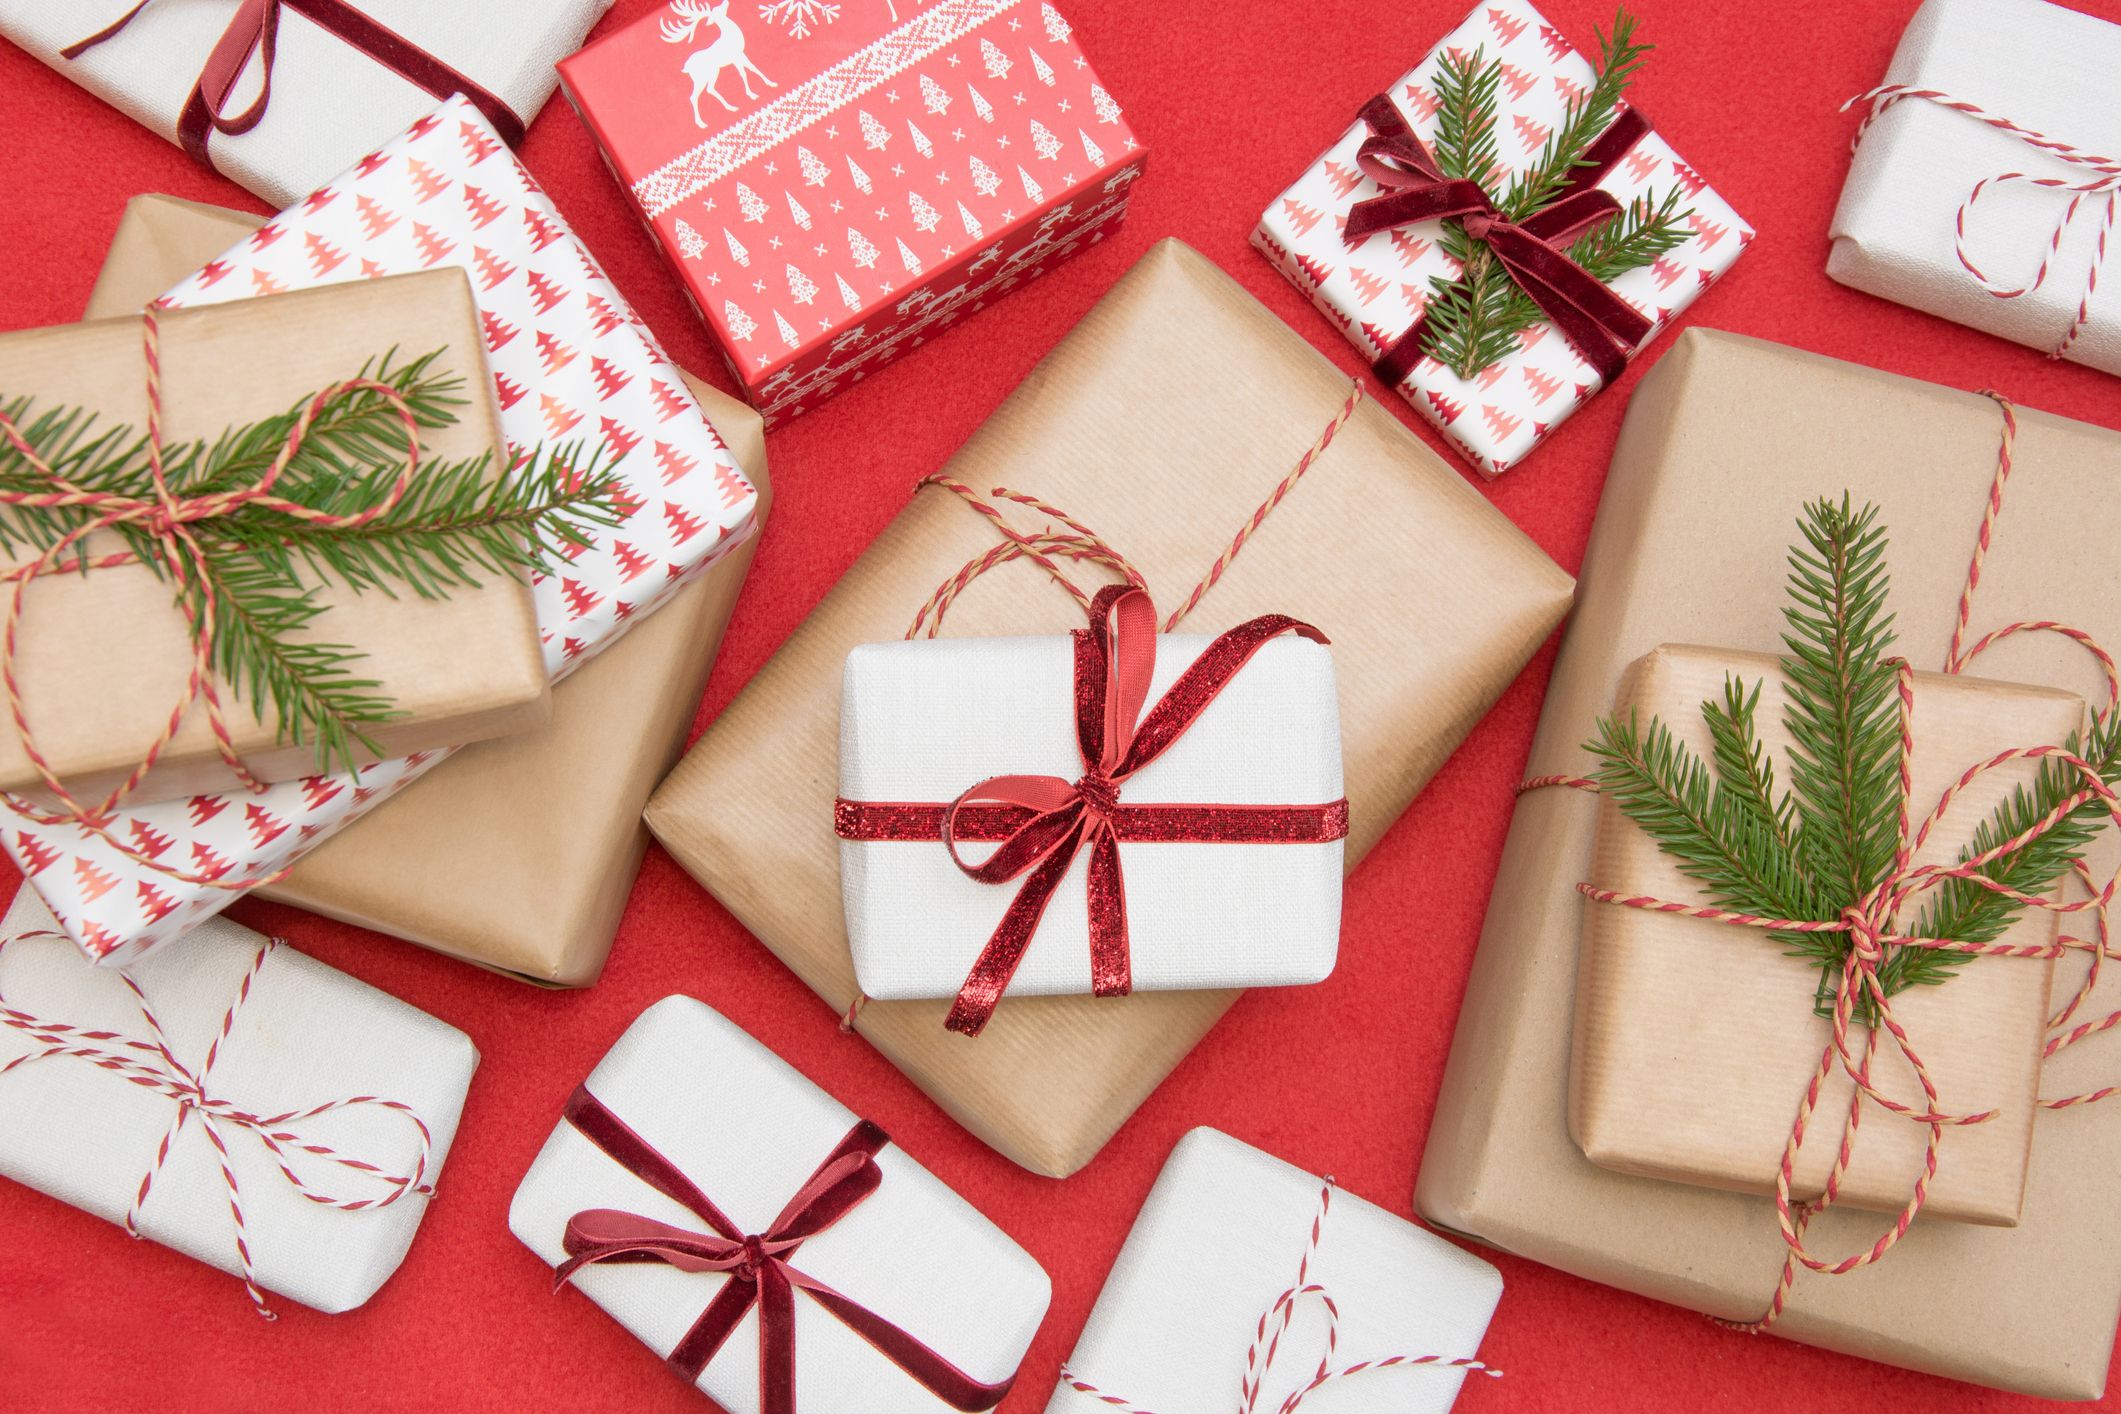 How to find the perfect gift for mother-in-law Christmas
